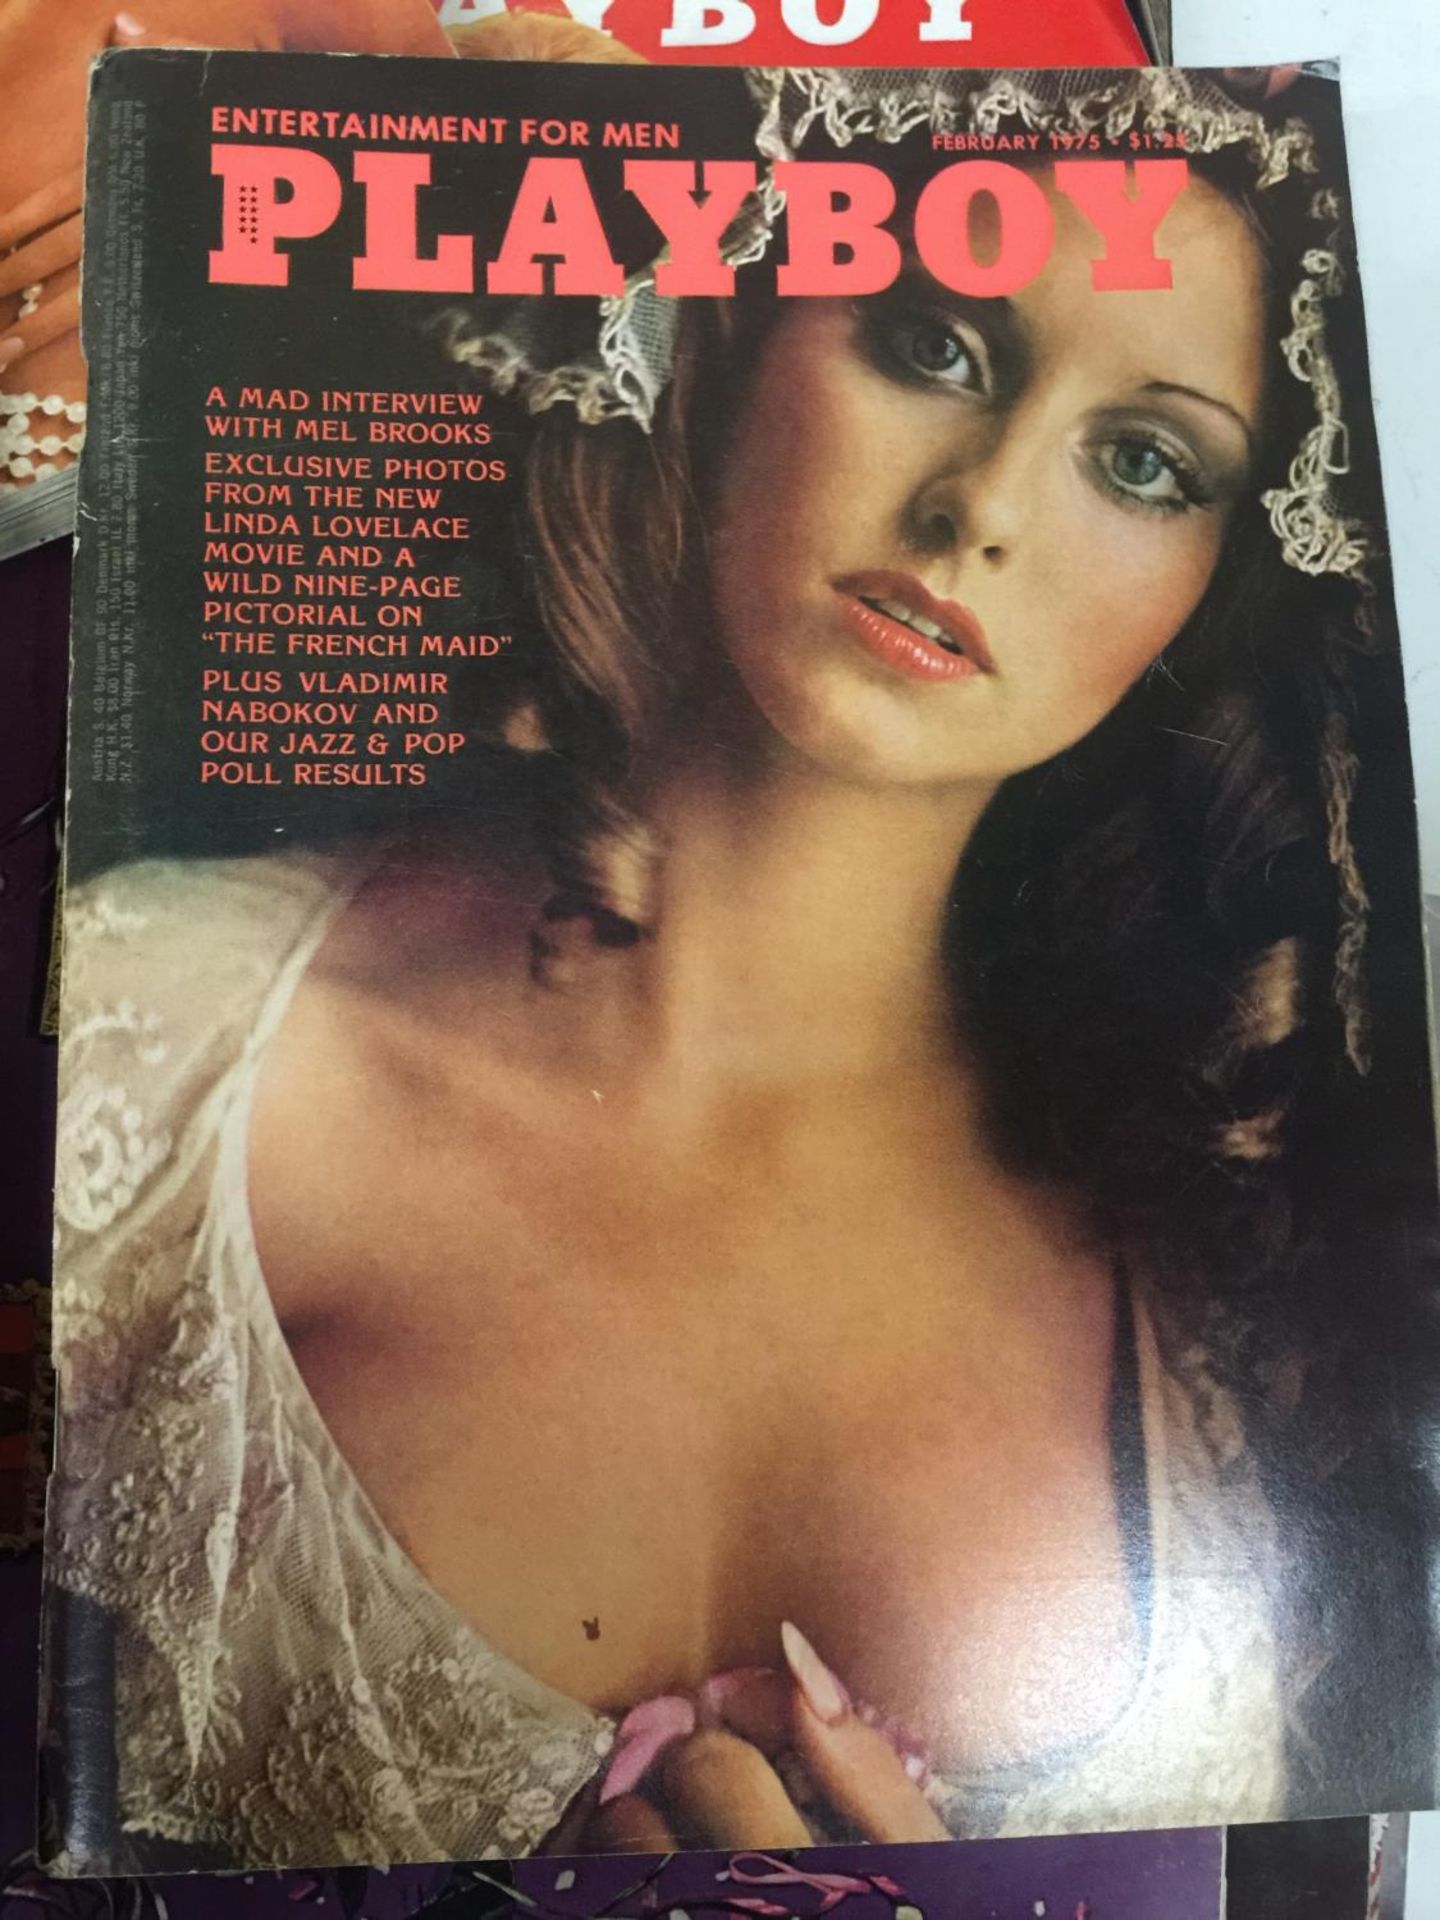 A LARGE QUANTITY OF VINTAGE PLAYBOY MAGAZINES FROM THE 1960'S AND 1970'S - Image 3 of 5